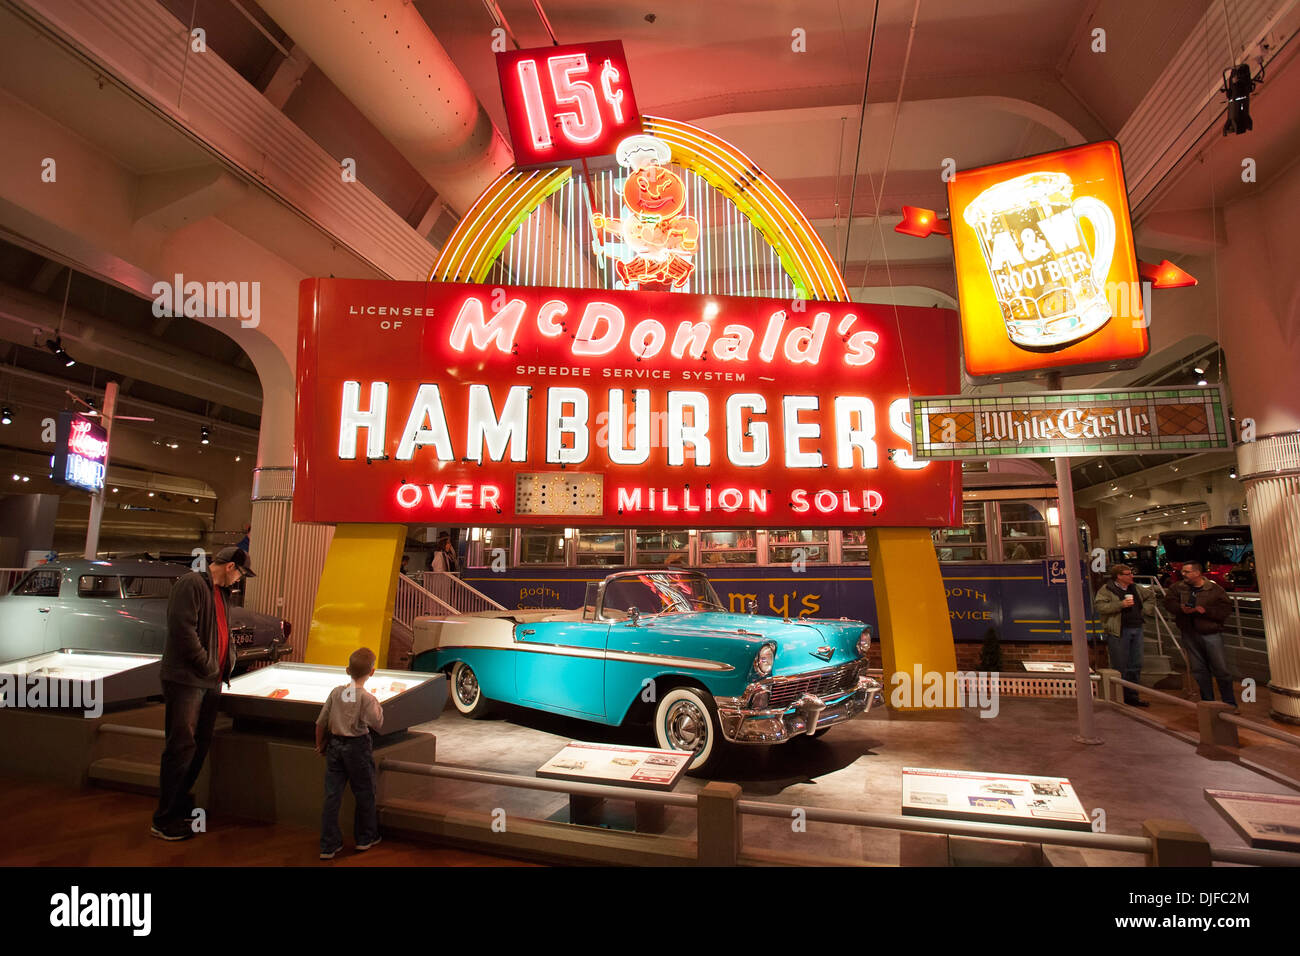 Dearborn, Michigan - A 1956 Chevrolet Bel Air convertible and a McDonald's sign at the Henry Ford Museum. Stock Photo